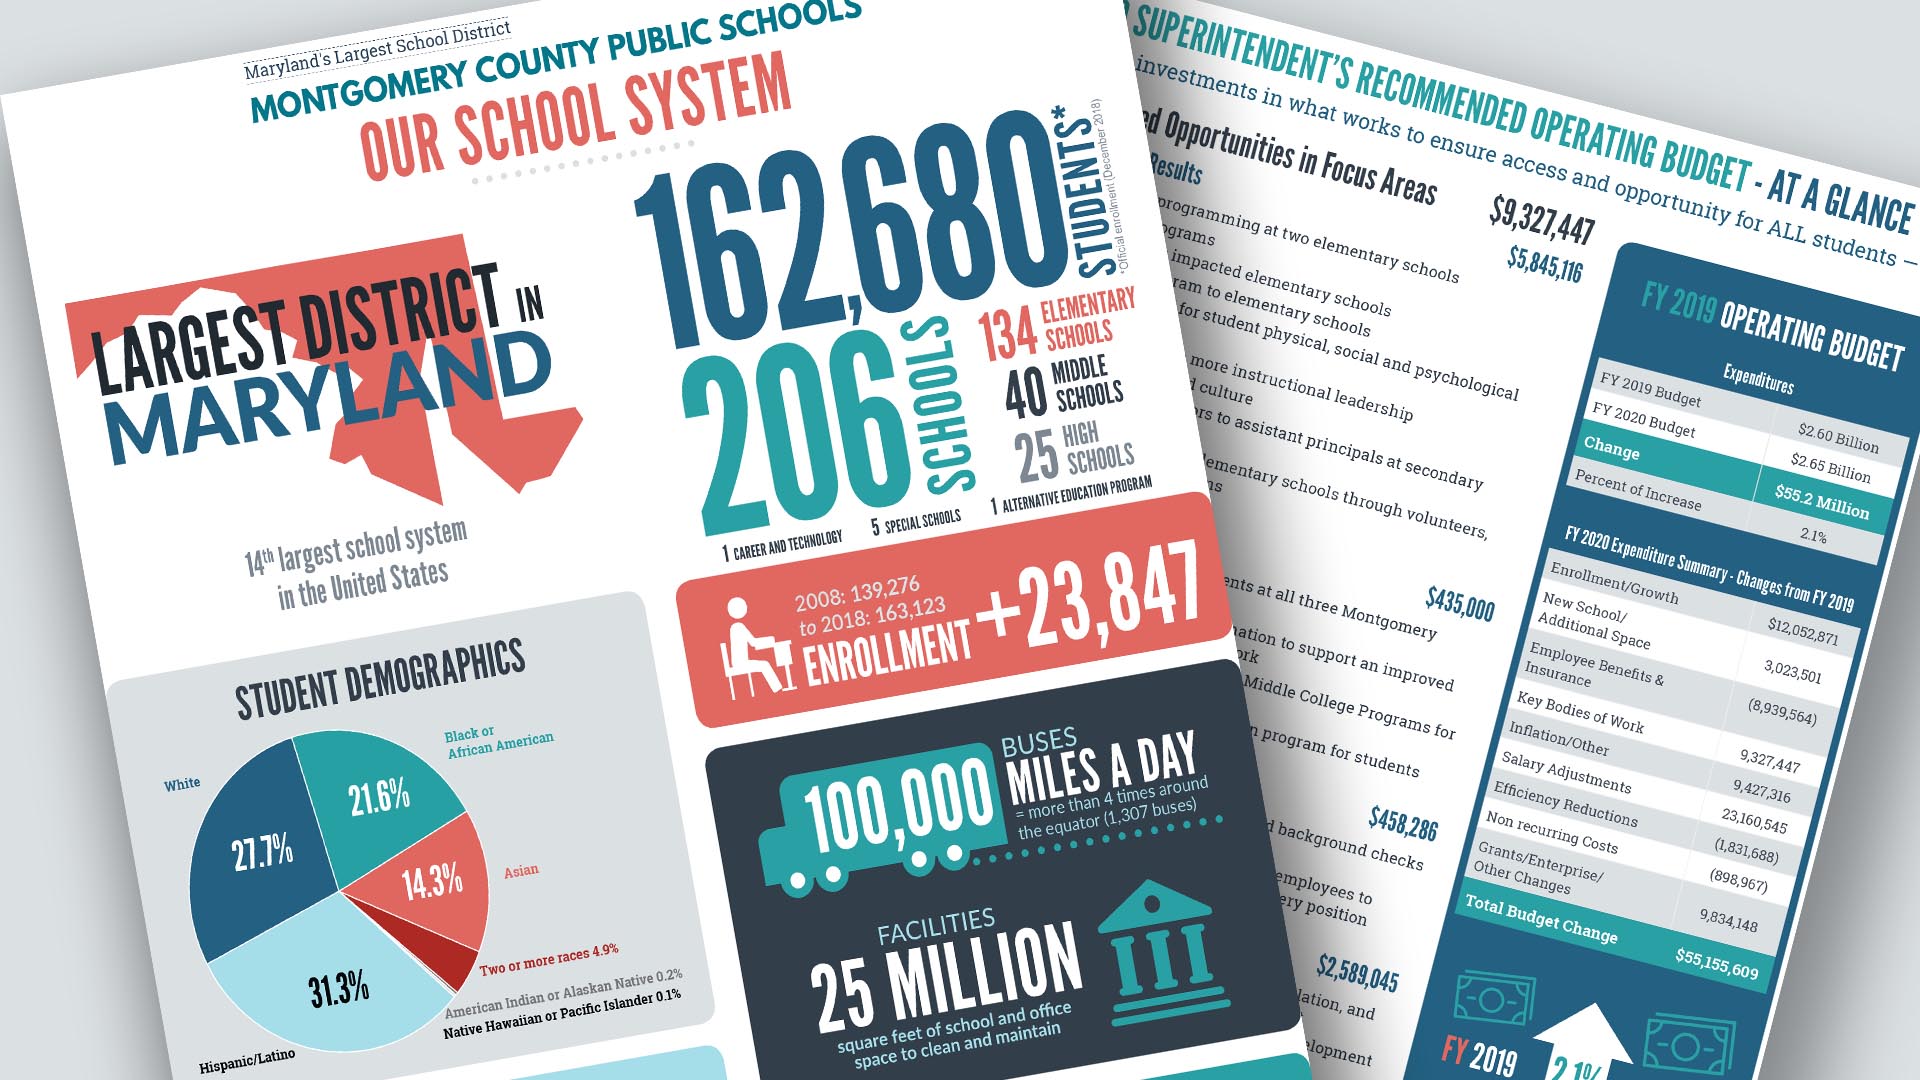 FY 2020 Superintendent's Recommended Operating Budget—At A Glance